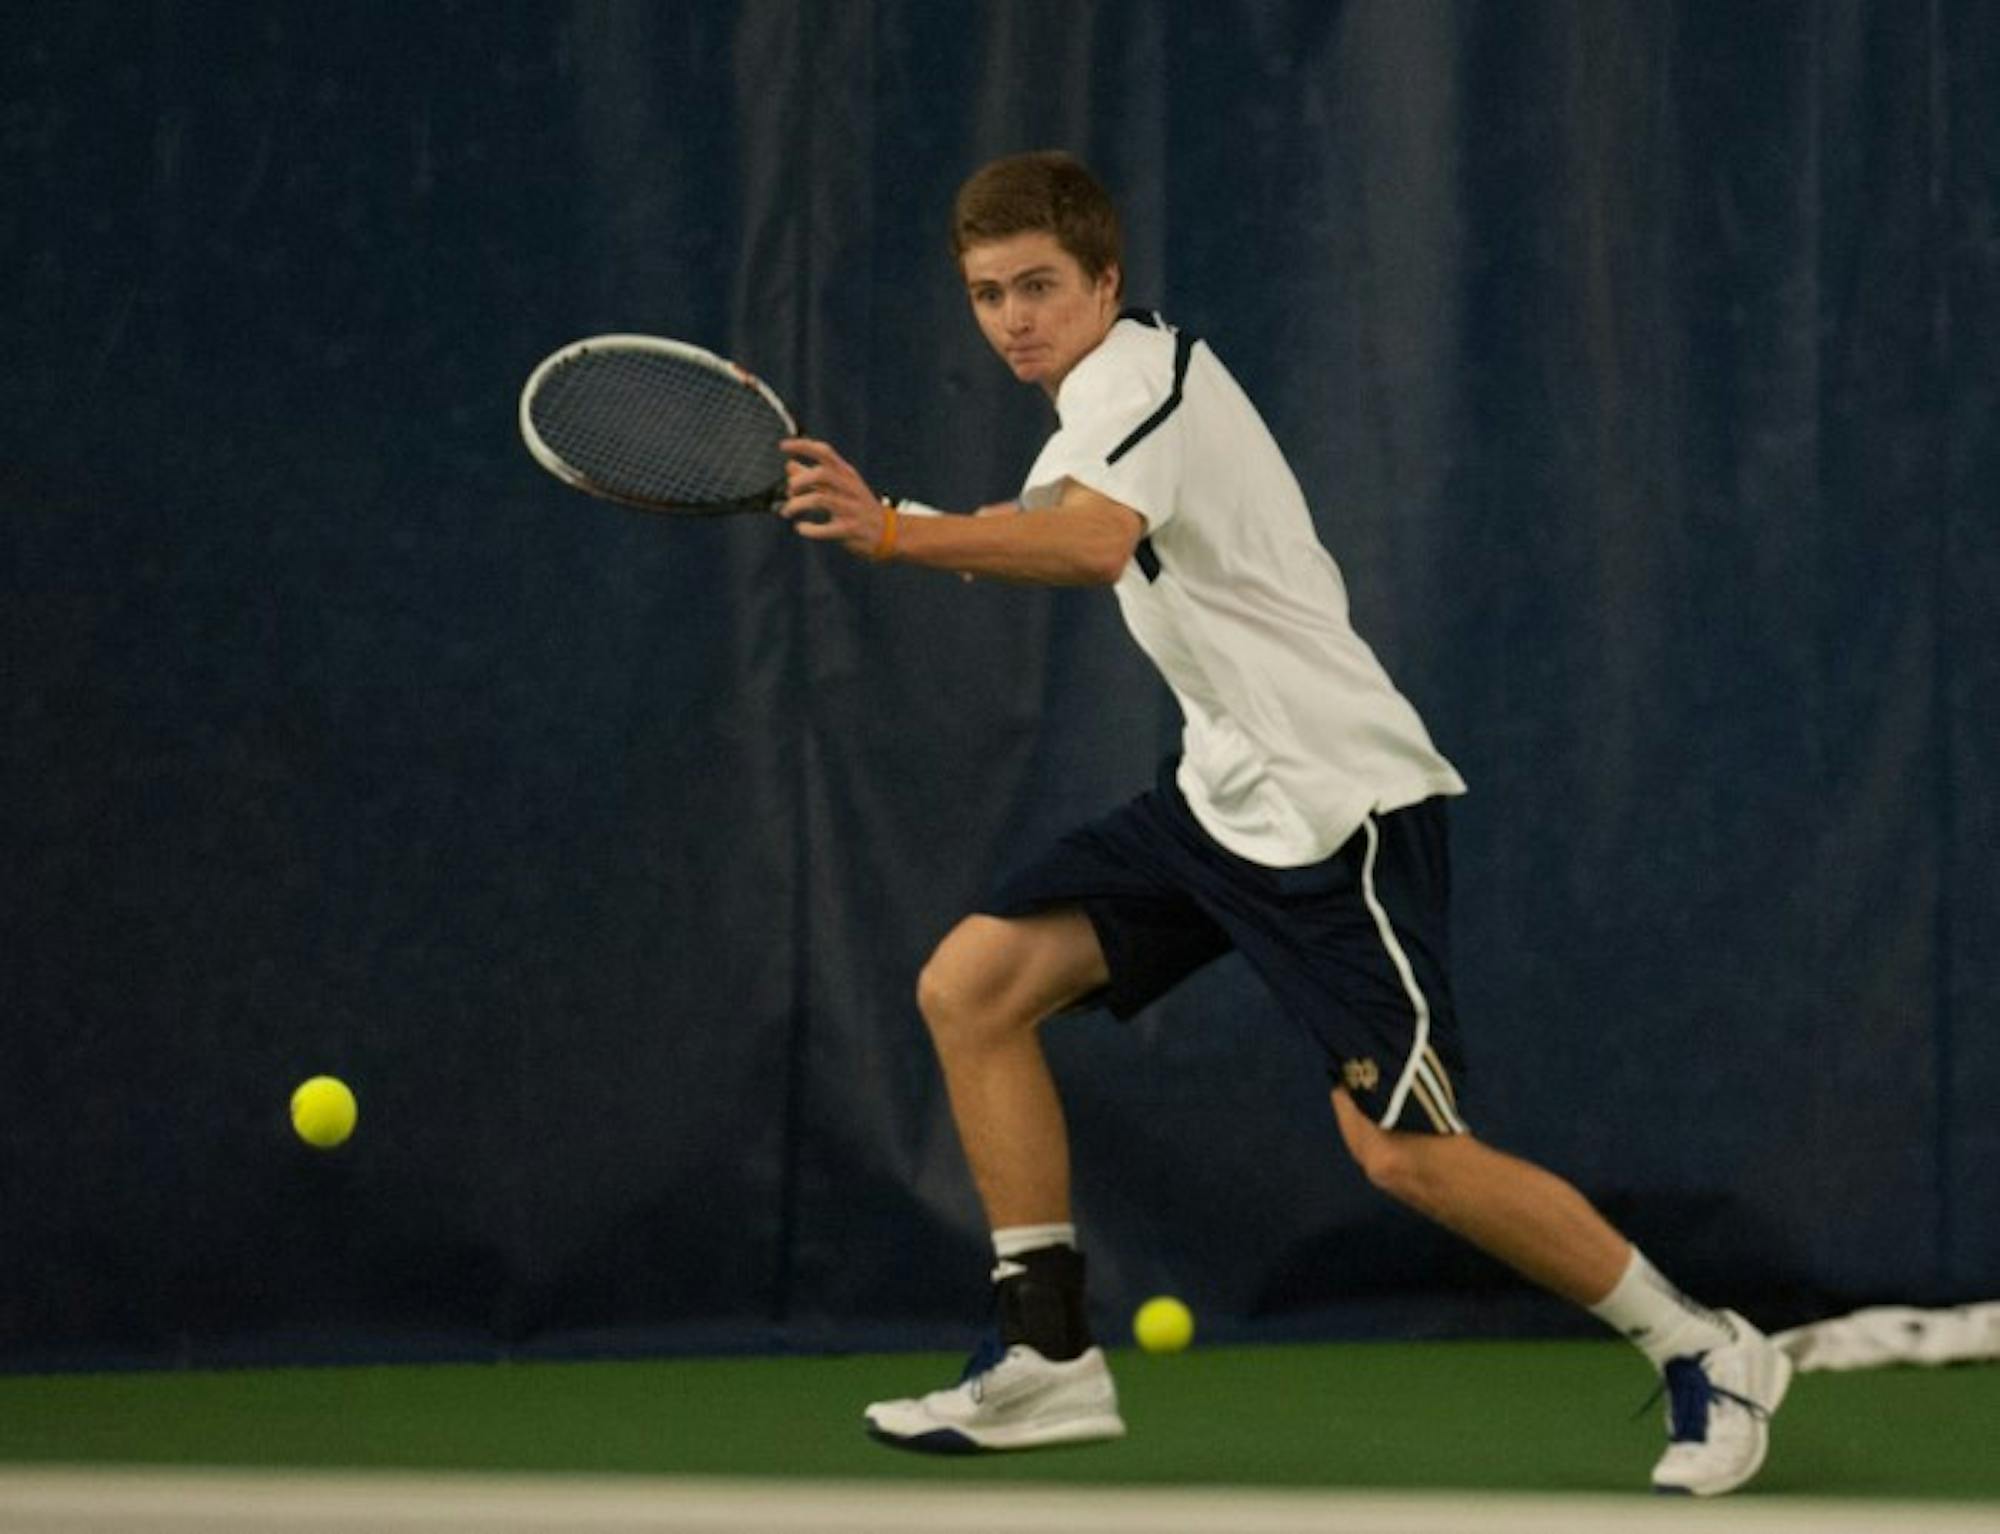 Notre Dame junior Quentin Monaghan prepares to return a shot during a match against Virginia Tech at the Eck Tennis Center on Feb. 28.